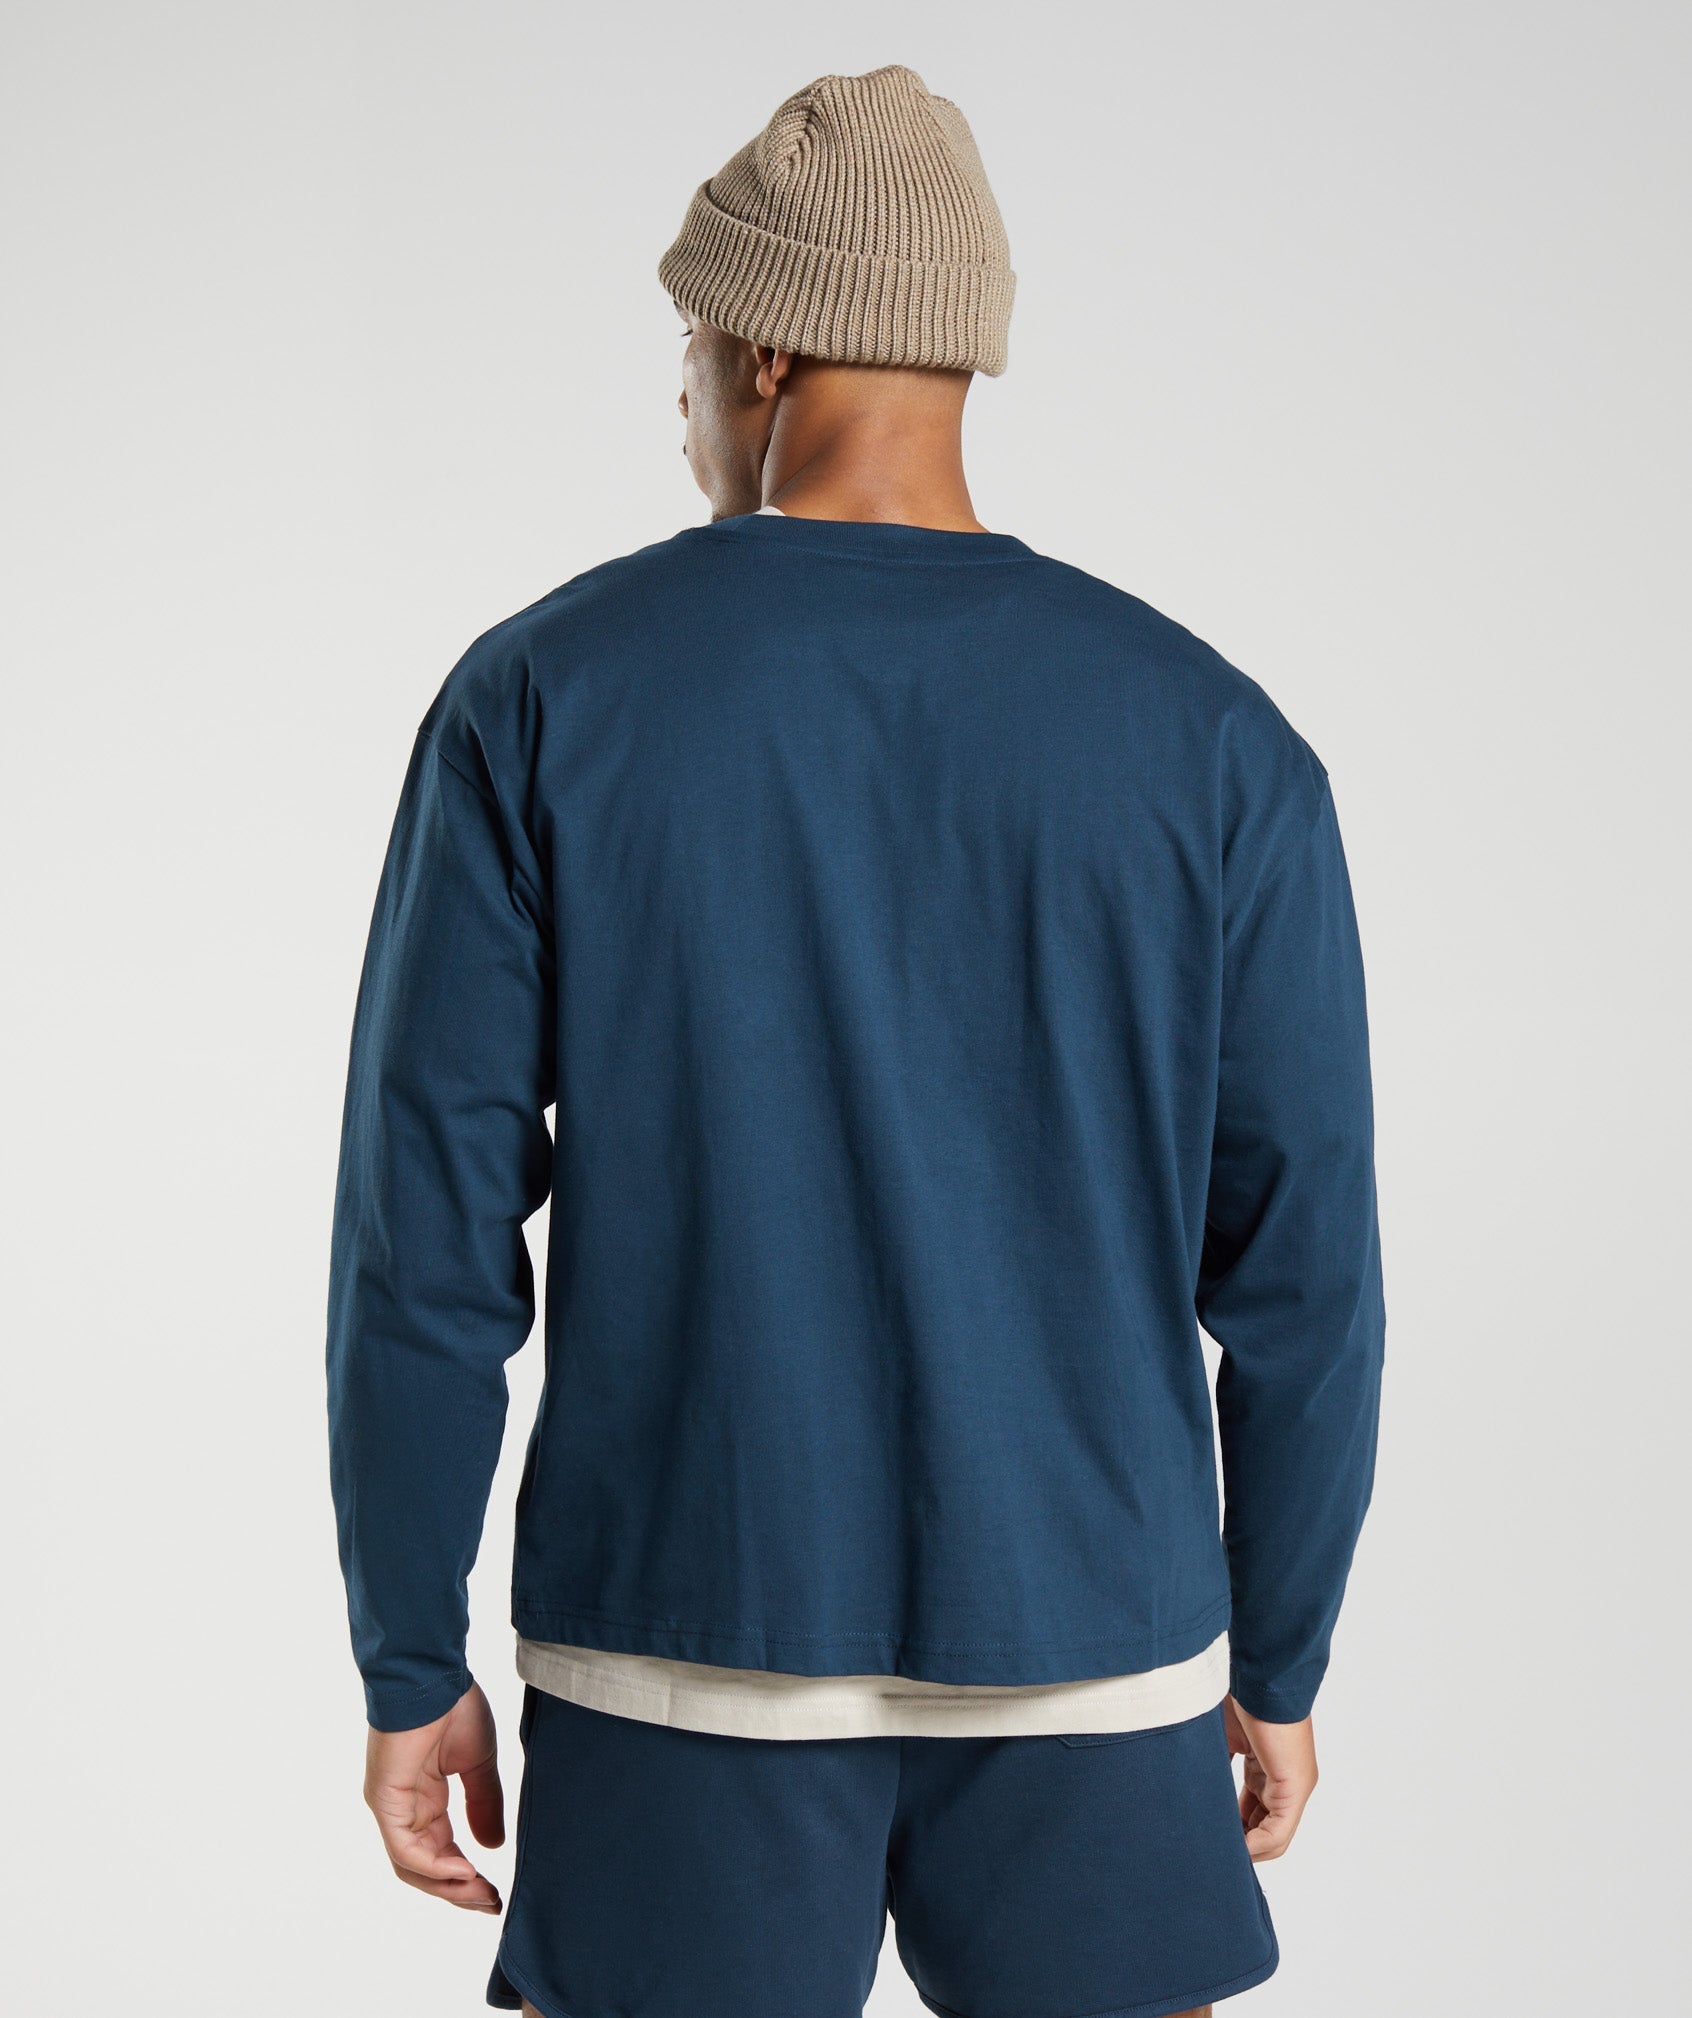 Rest Day Sweats Long Sleeve T-Shirt in Navy - view 3